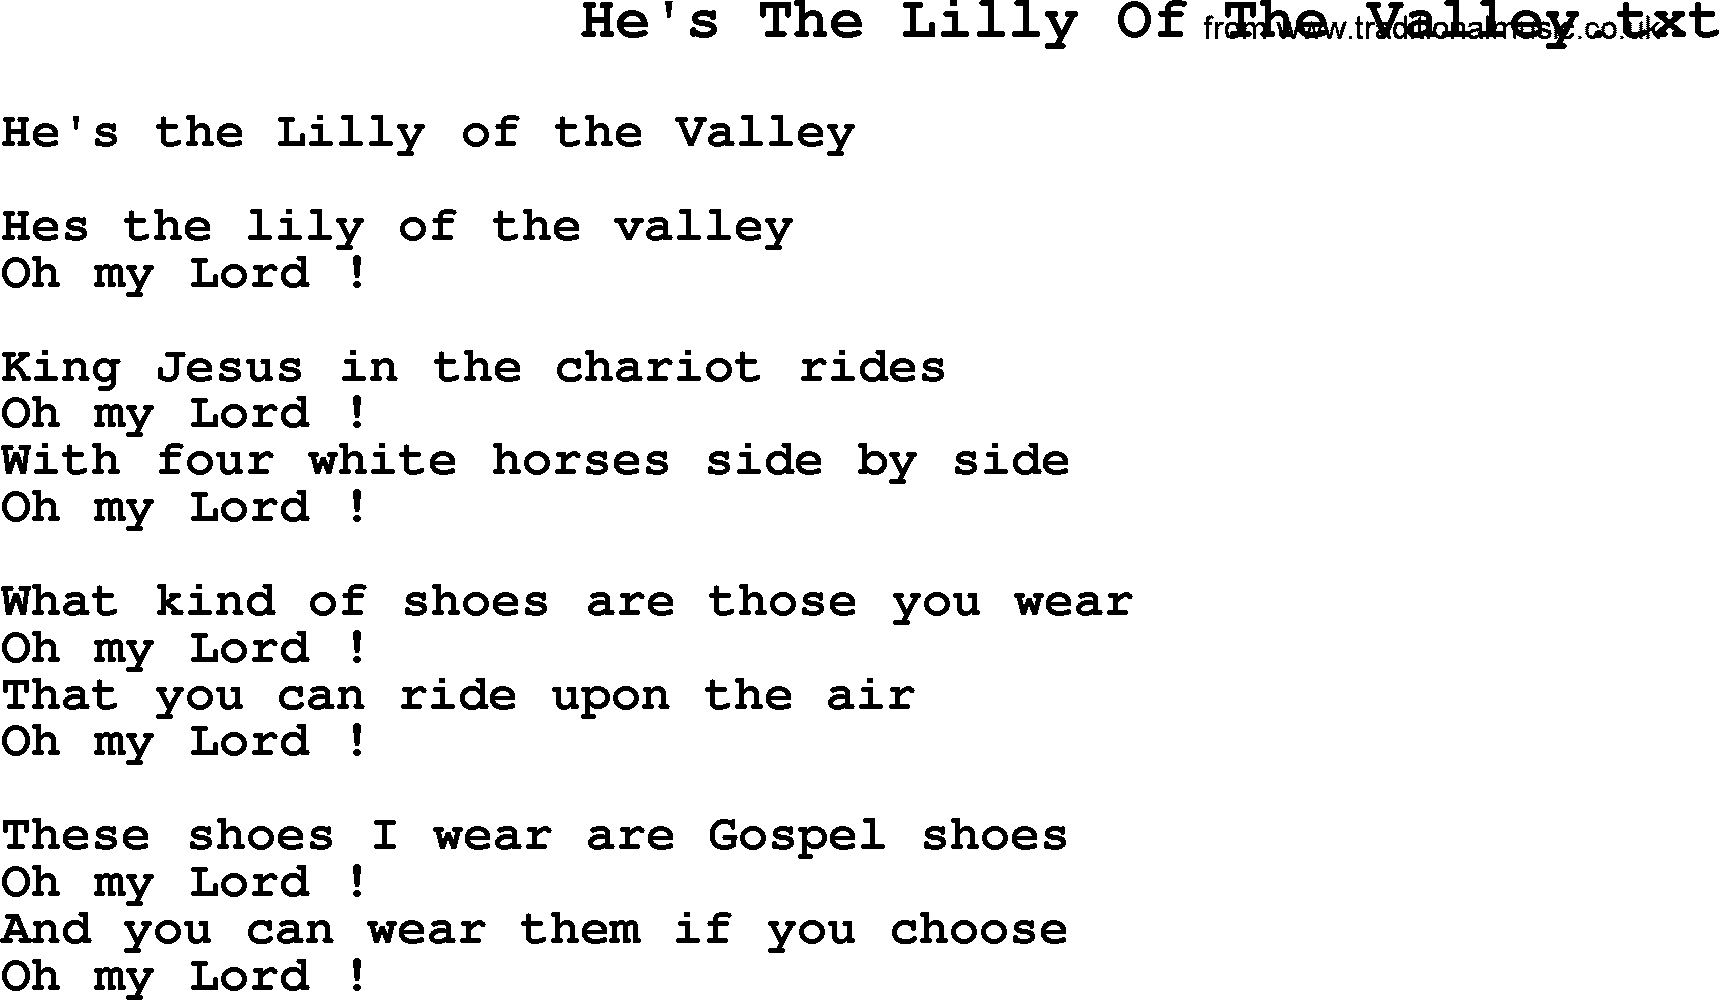 Negro Spiritual Song Lyrics for He's The Lilly Of The Valley